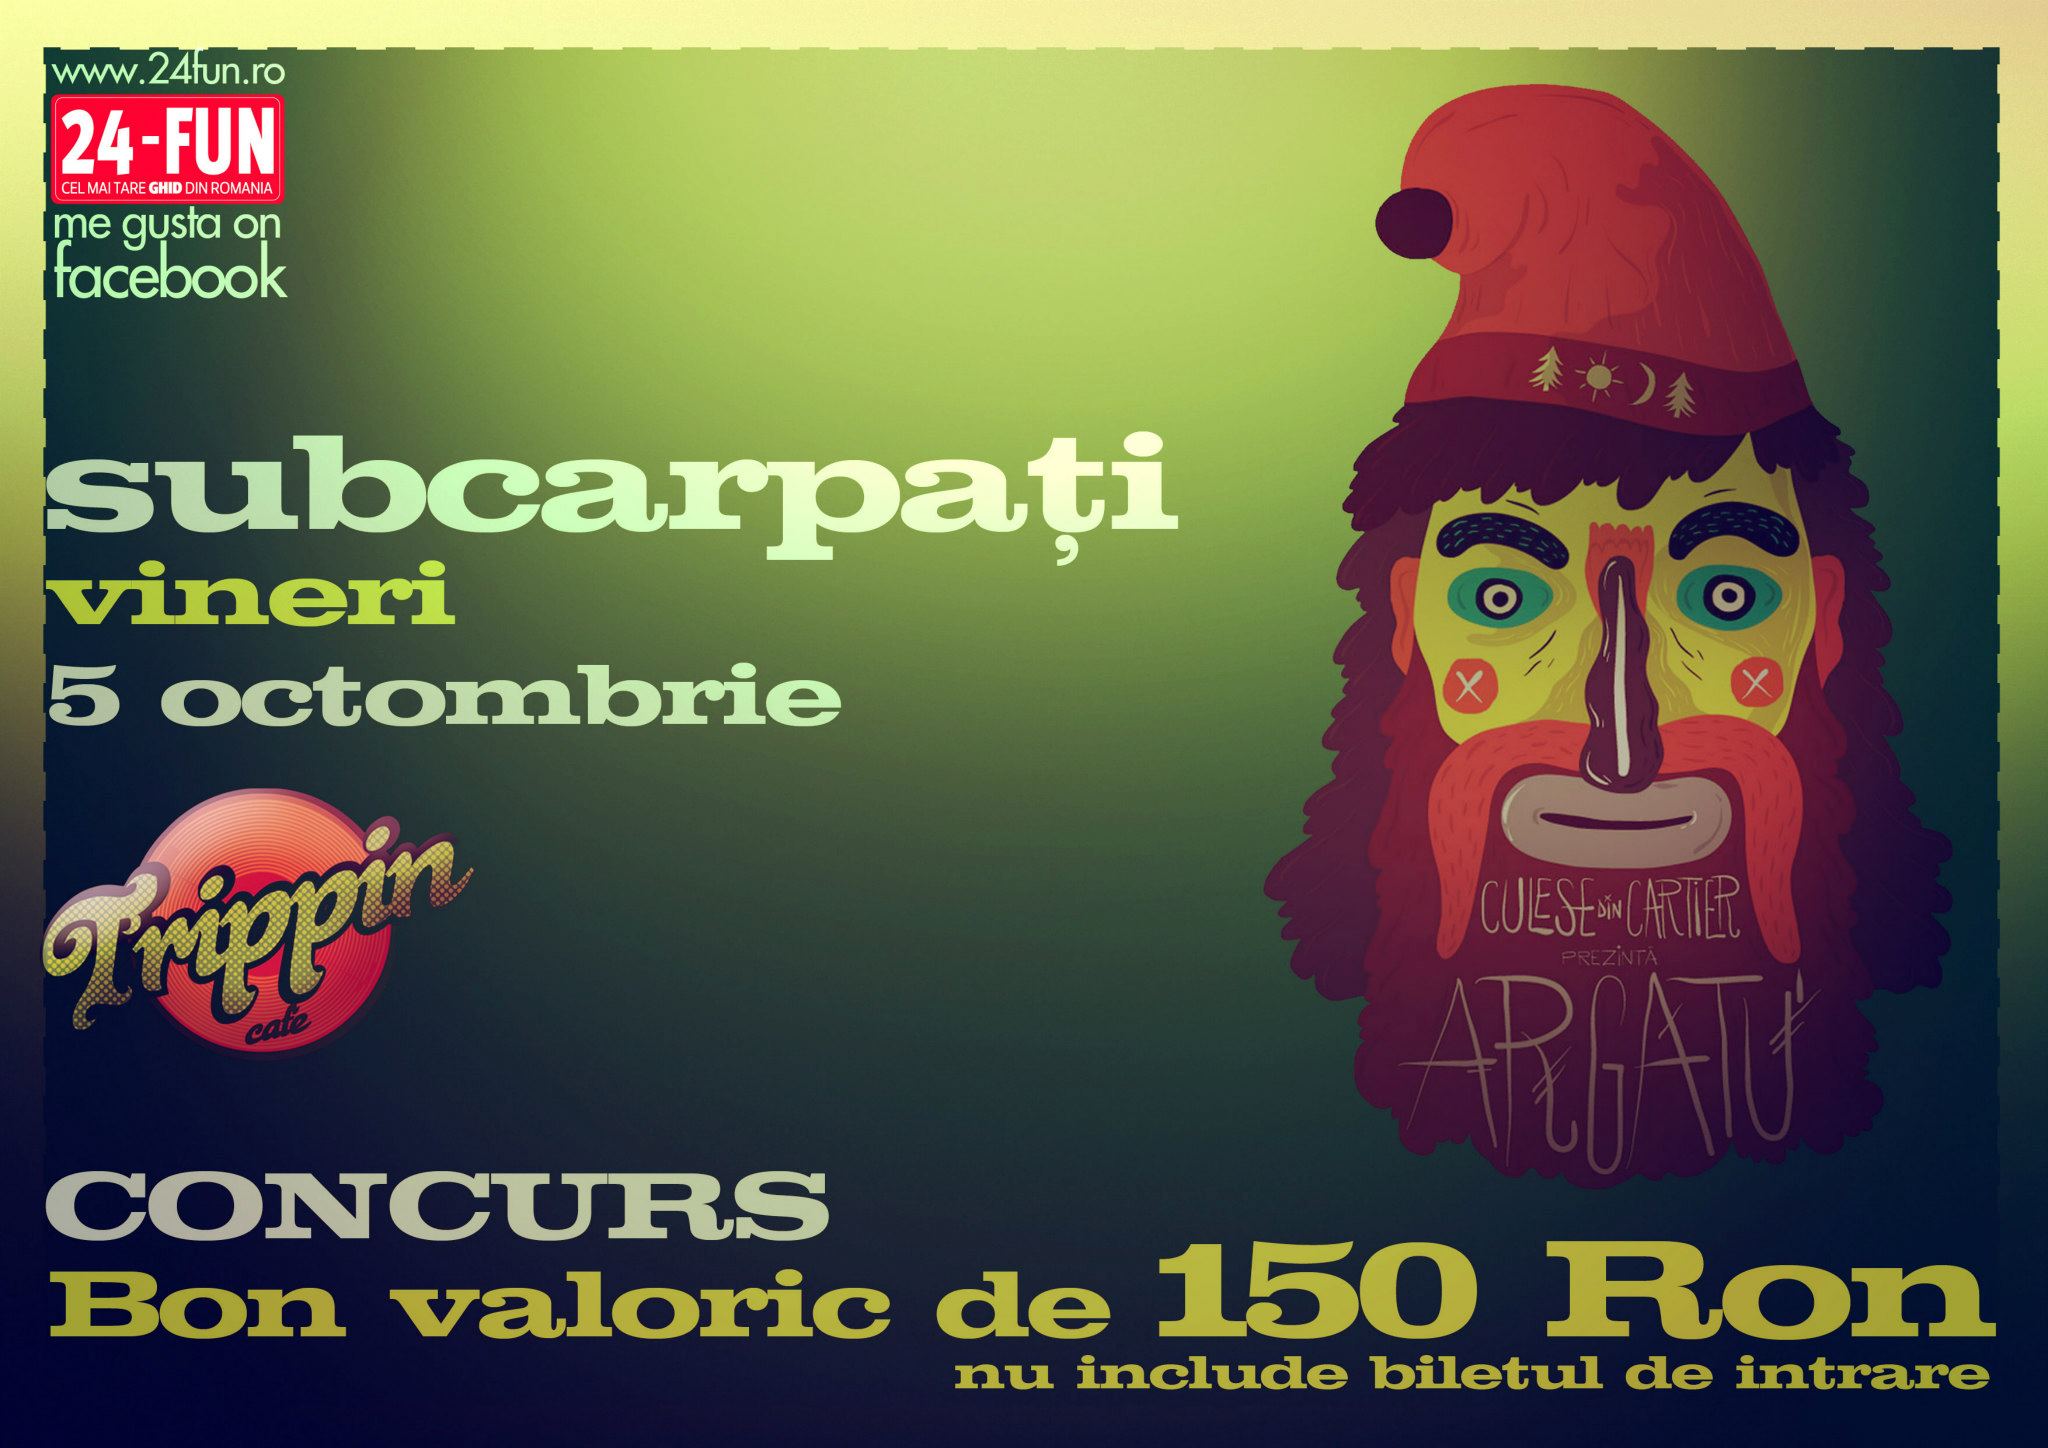 subcarpati concert trippin cafe brasov 5 octombrie